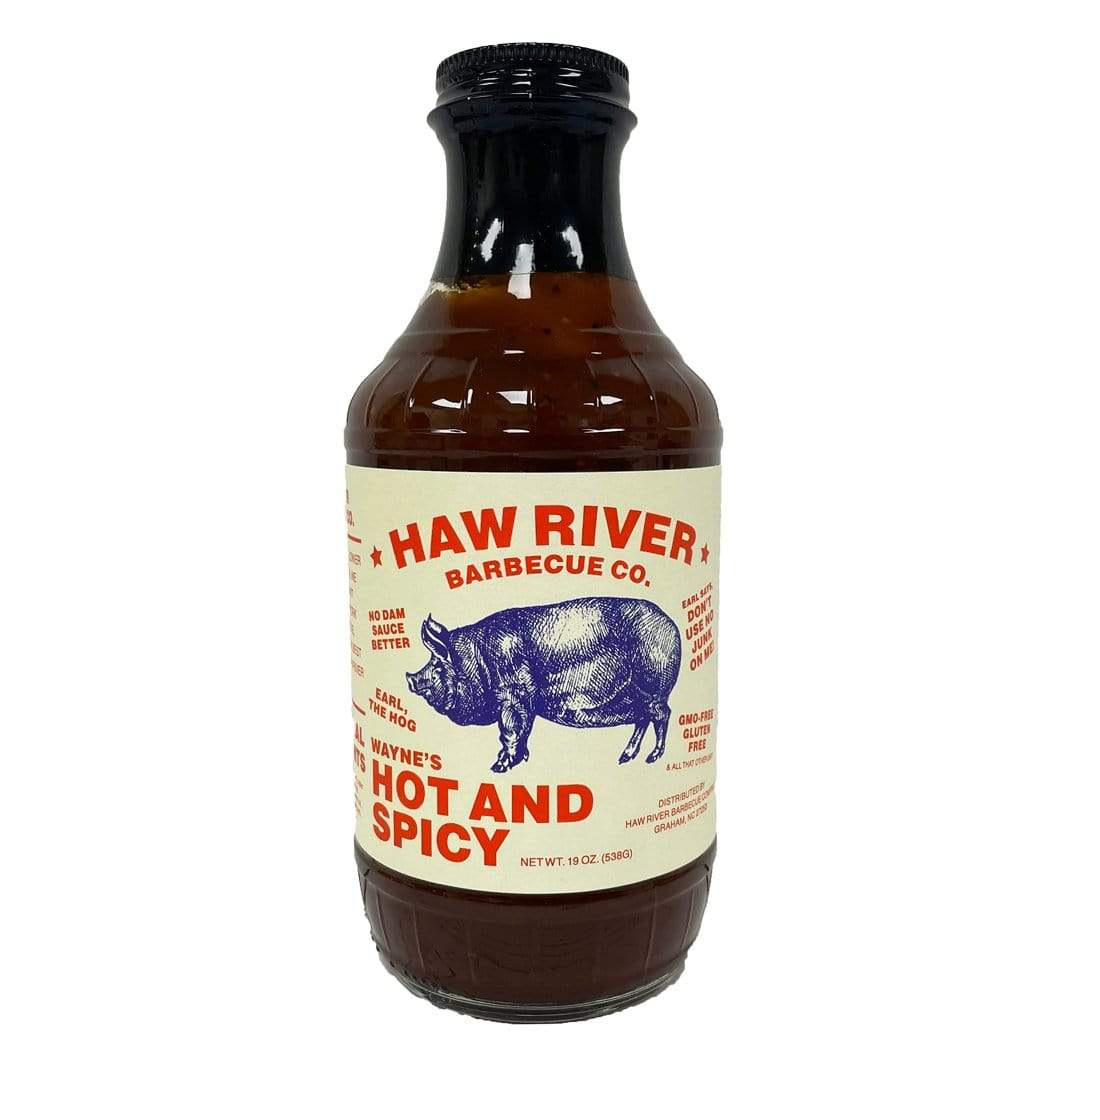 Haw River Barbecue Co. Haw River Barbecue Co. Wayne's Hot and Spicy BBQ Sauce